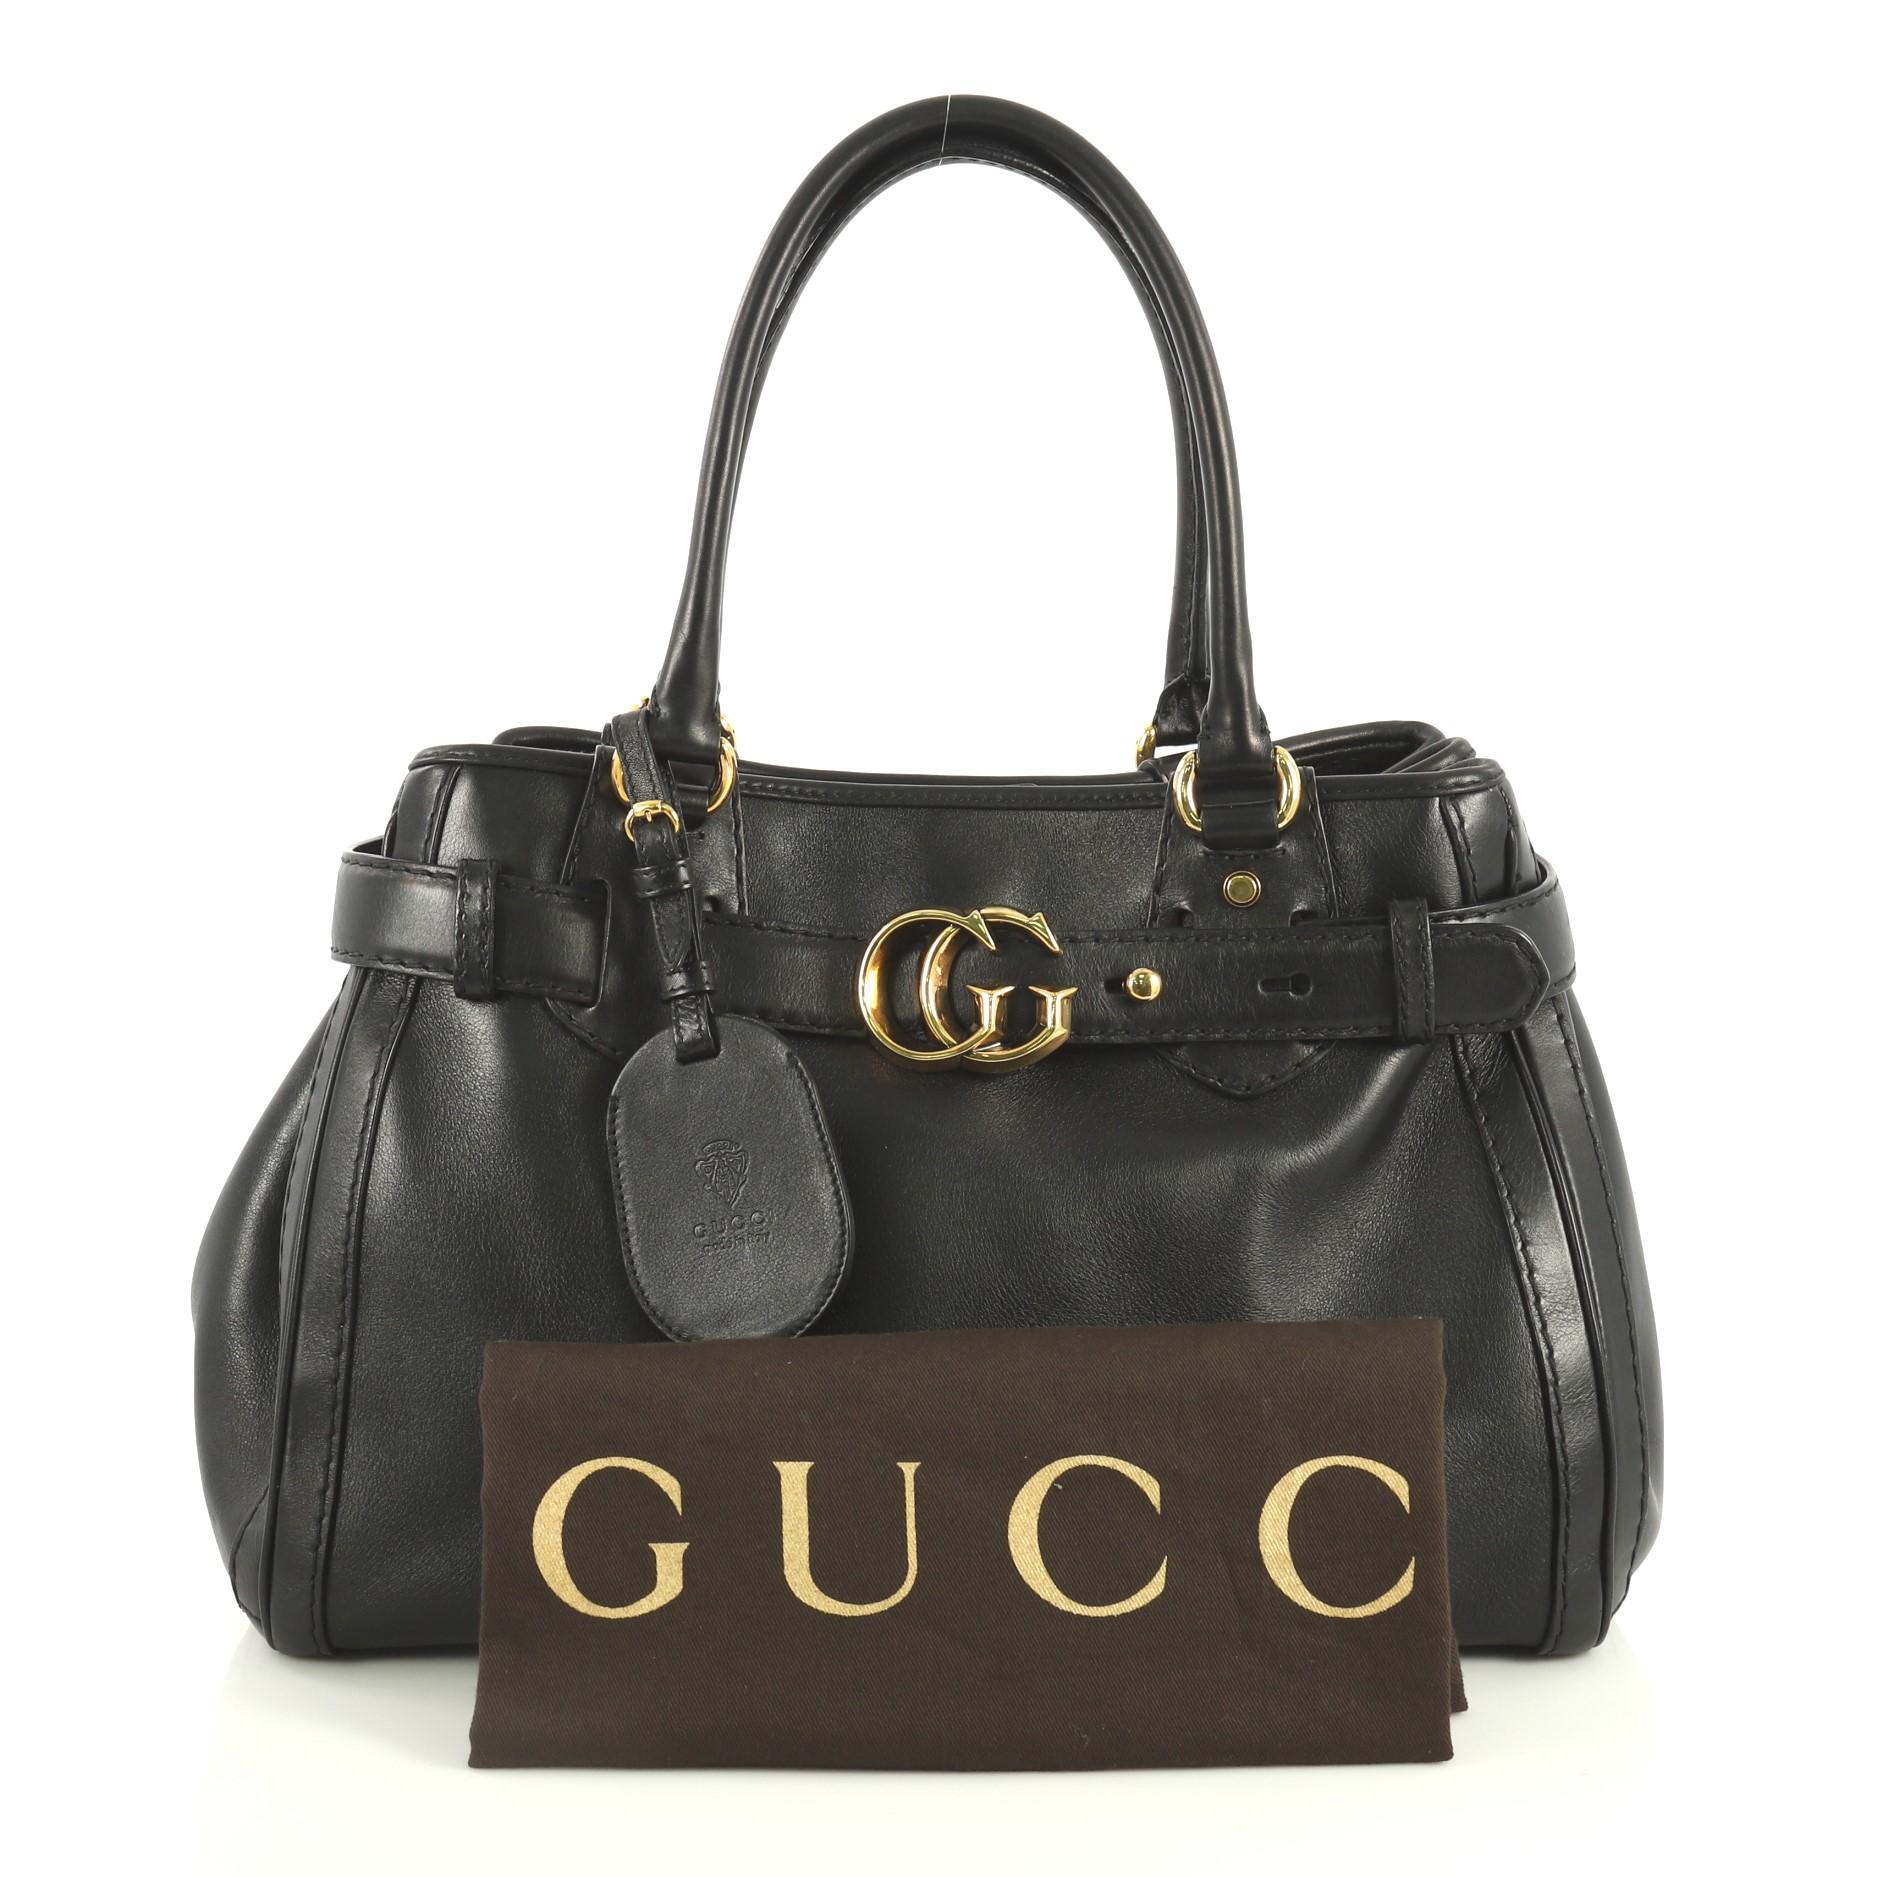 This Gucci GG Running Tote Leather Medium, crafted in black leather, features dual rolled leather handles, top belt with loops and interlocking GG buckle, protective base studs, and gold-tone hardware. Its magnetic snap button closure opens to a